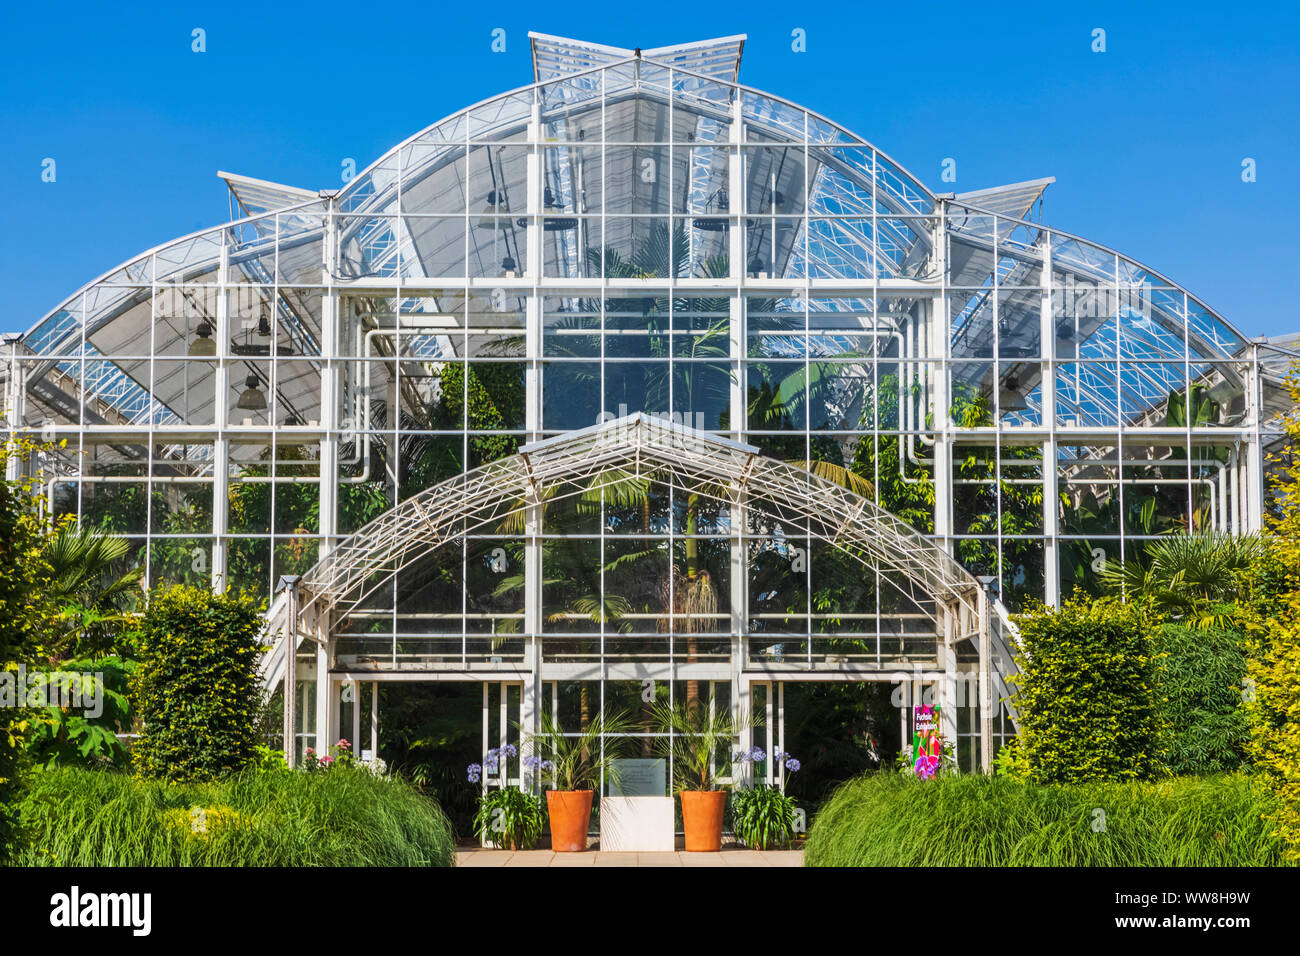 England, Surrey, Guildford, Wisley, The Royal Horticultural Society Garden, The Glasshouse Stock Photo